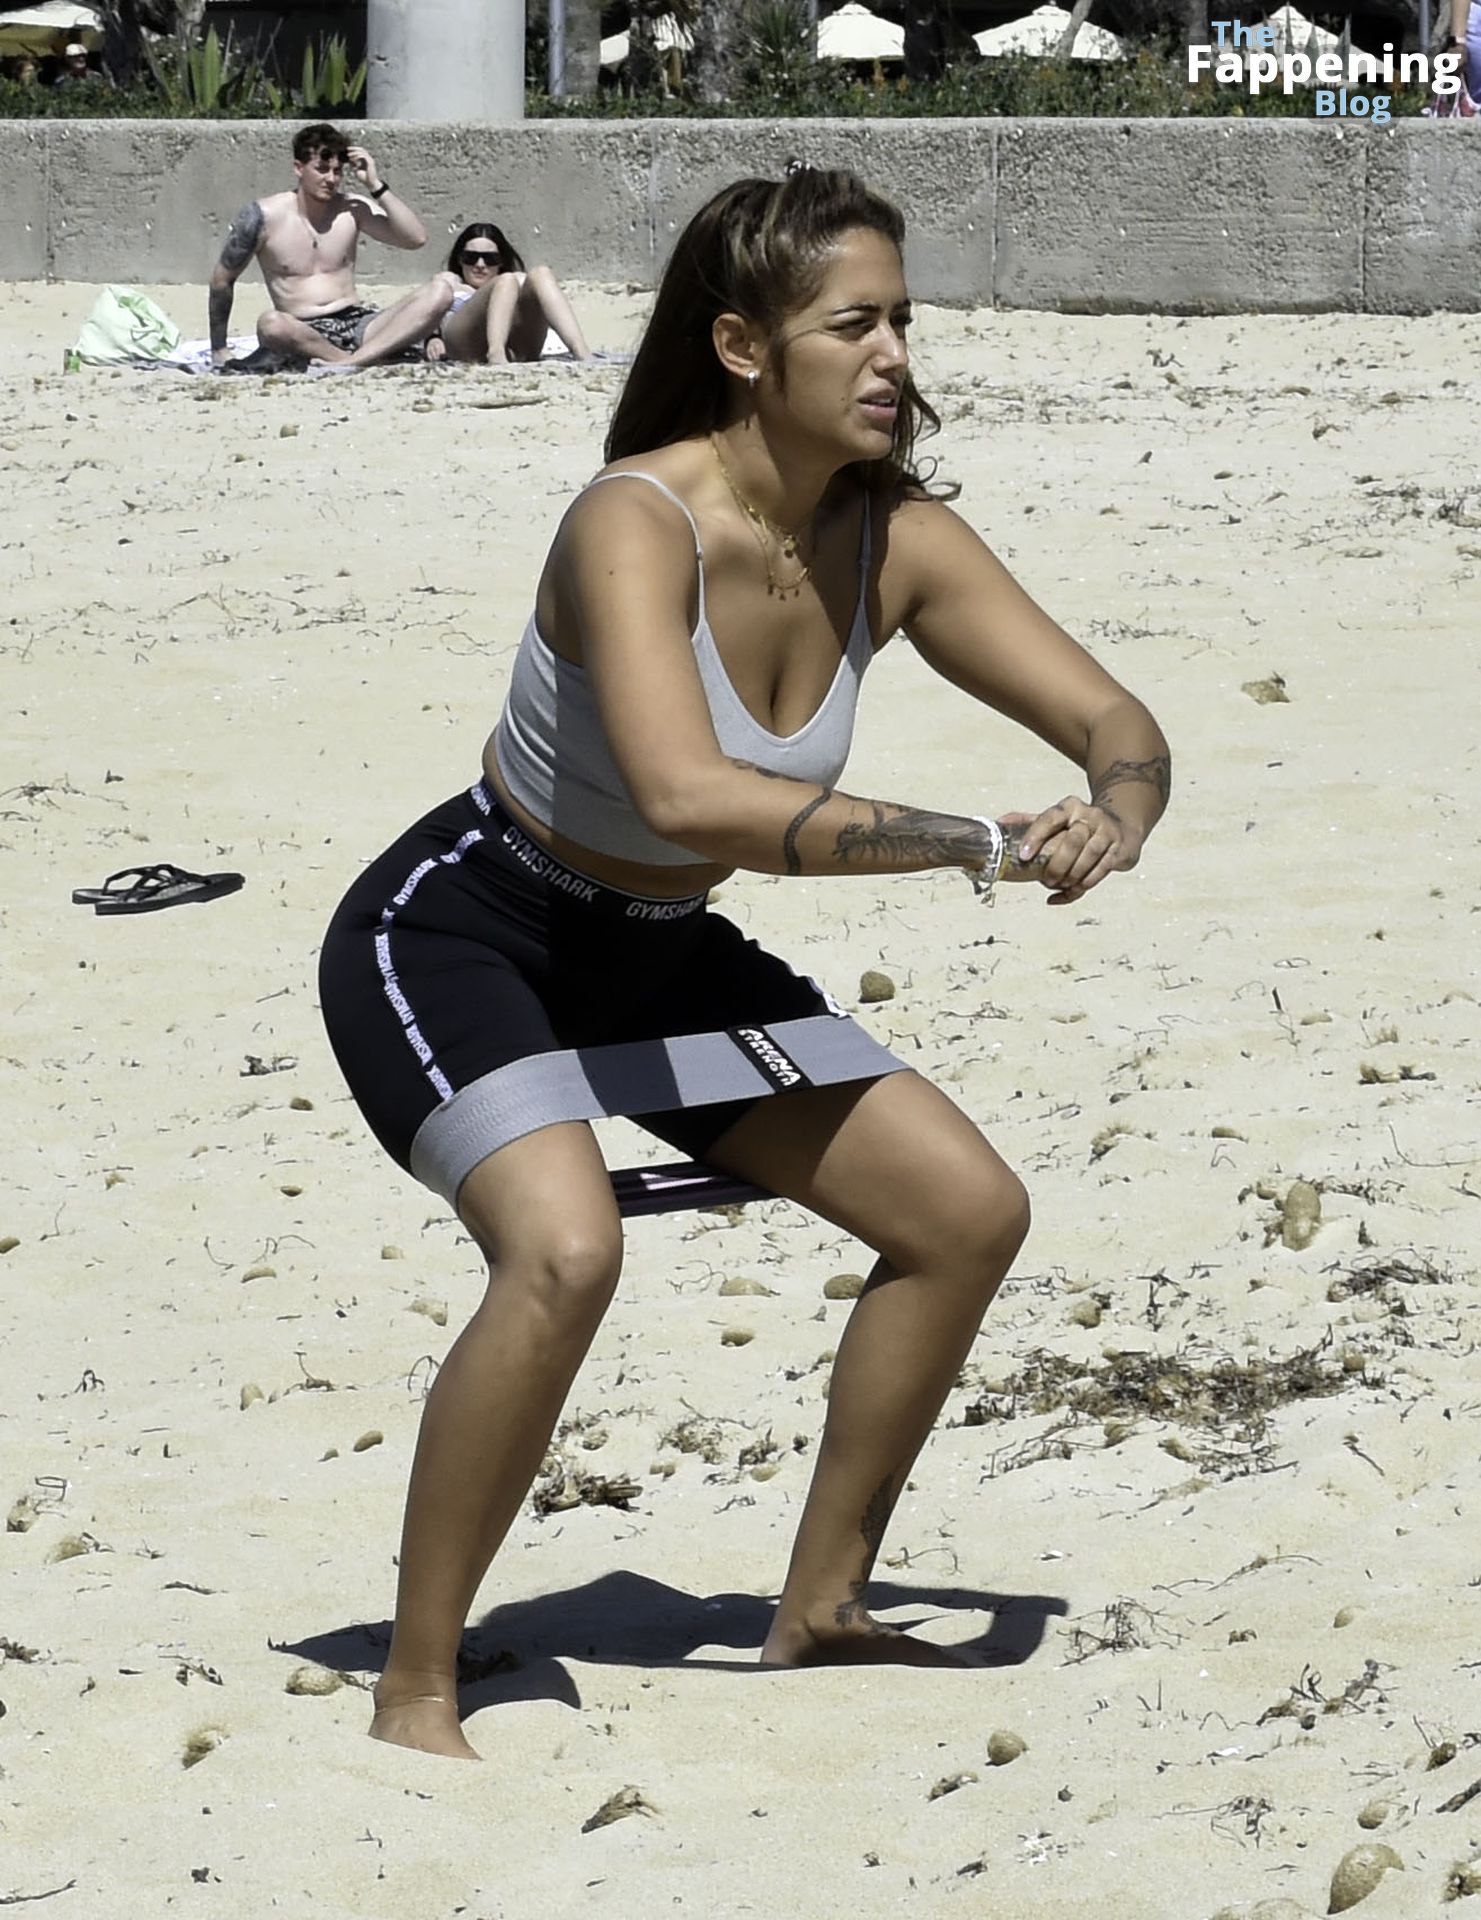 Malin Andersson Shows Off Weight Loss As She Exercises on the Beach with Her PT (28 Photos)